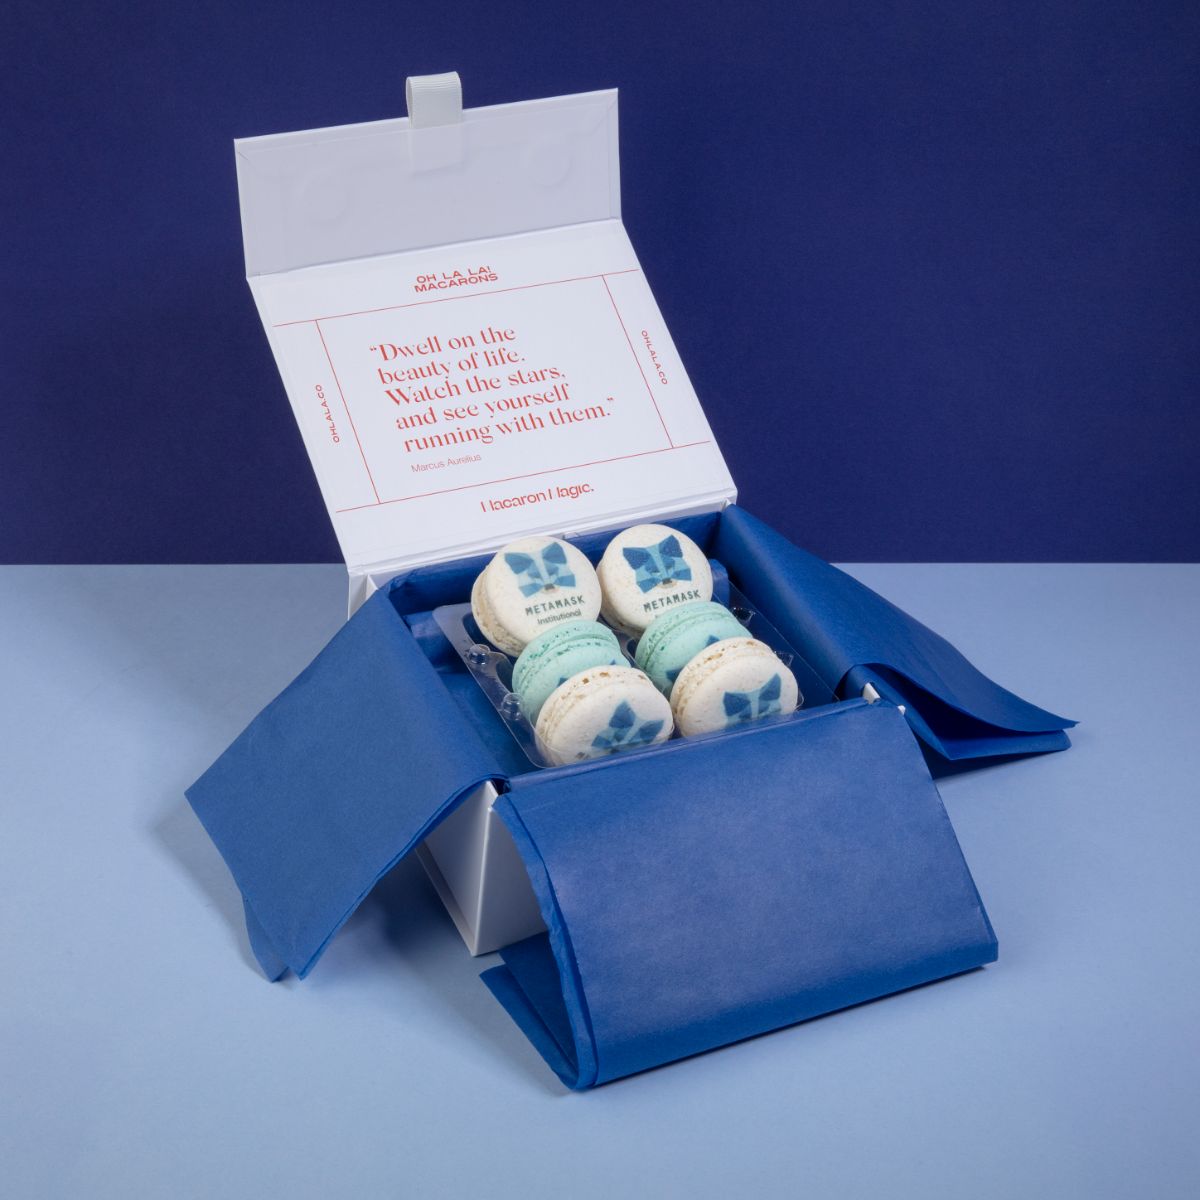 A small box lined with blue tissue paper containing bespoke white and blue macarons